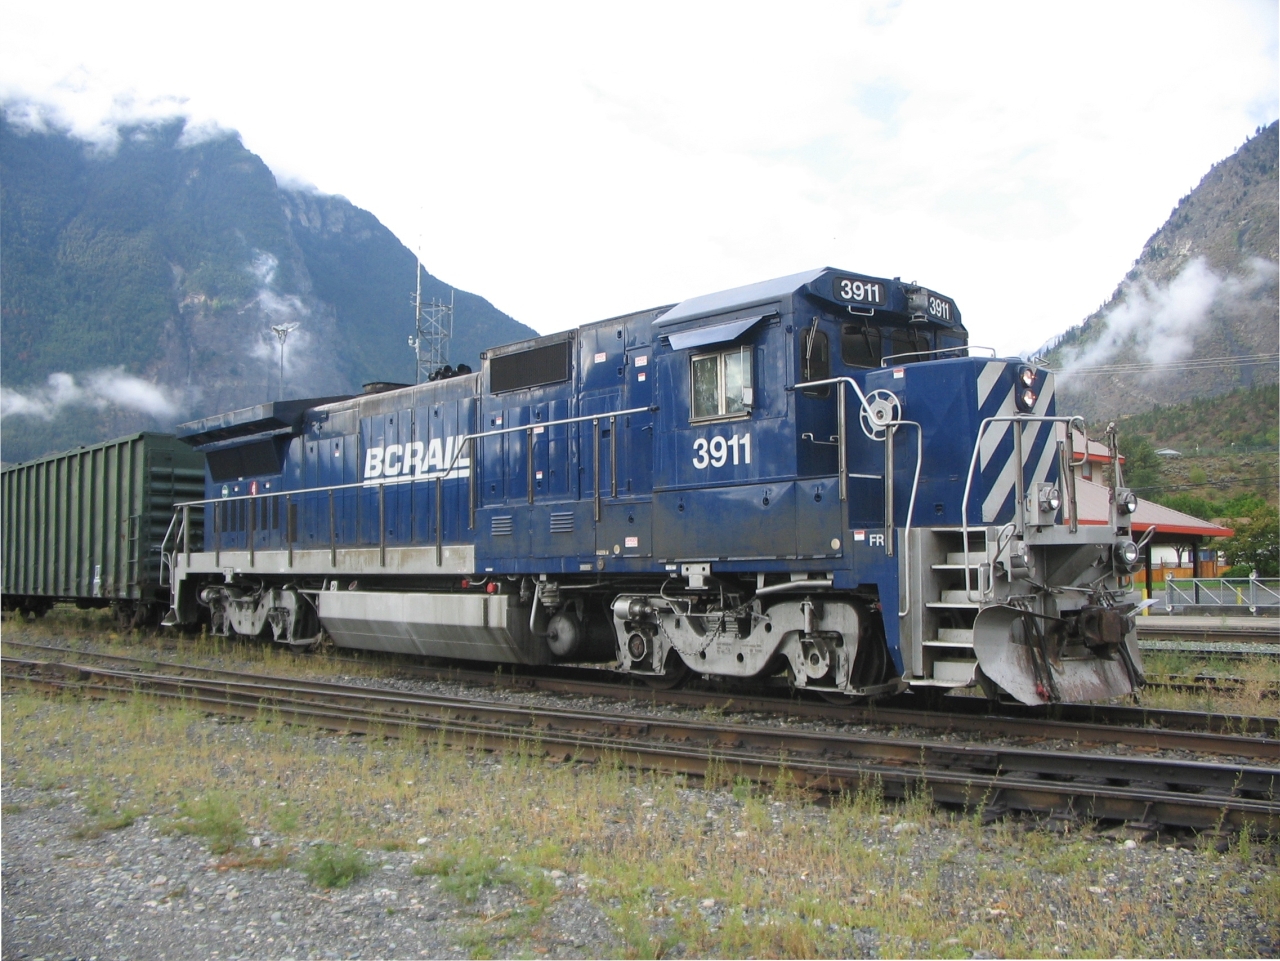 Idling away at Lillooet, power for the Chasm Switcher.